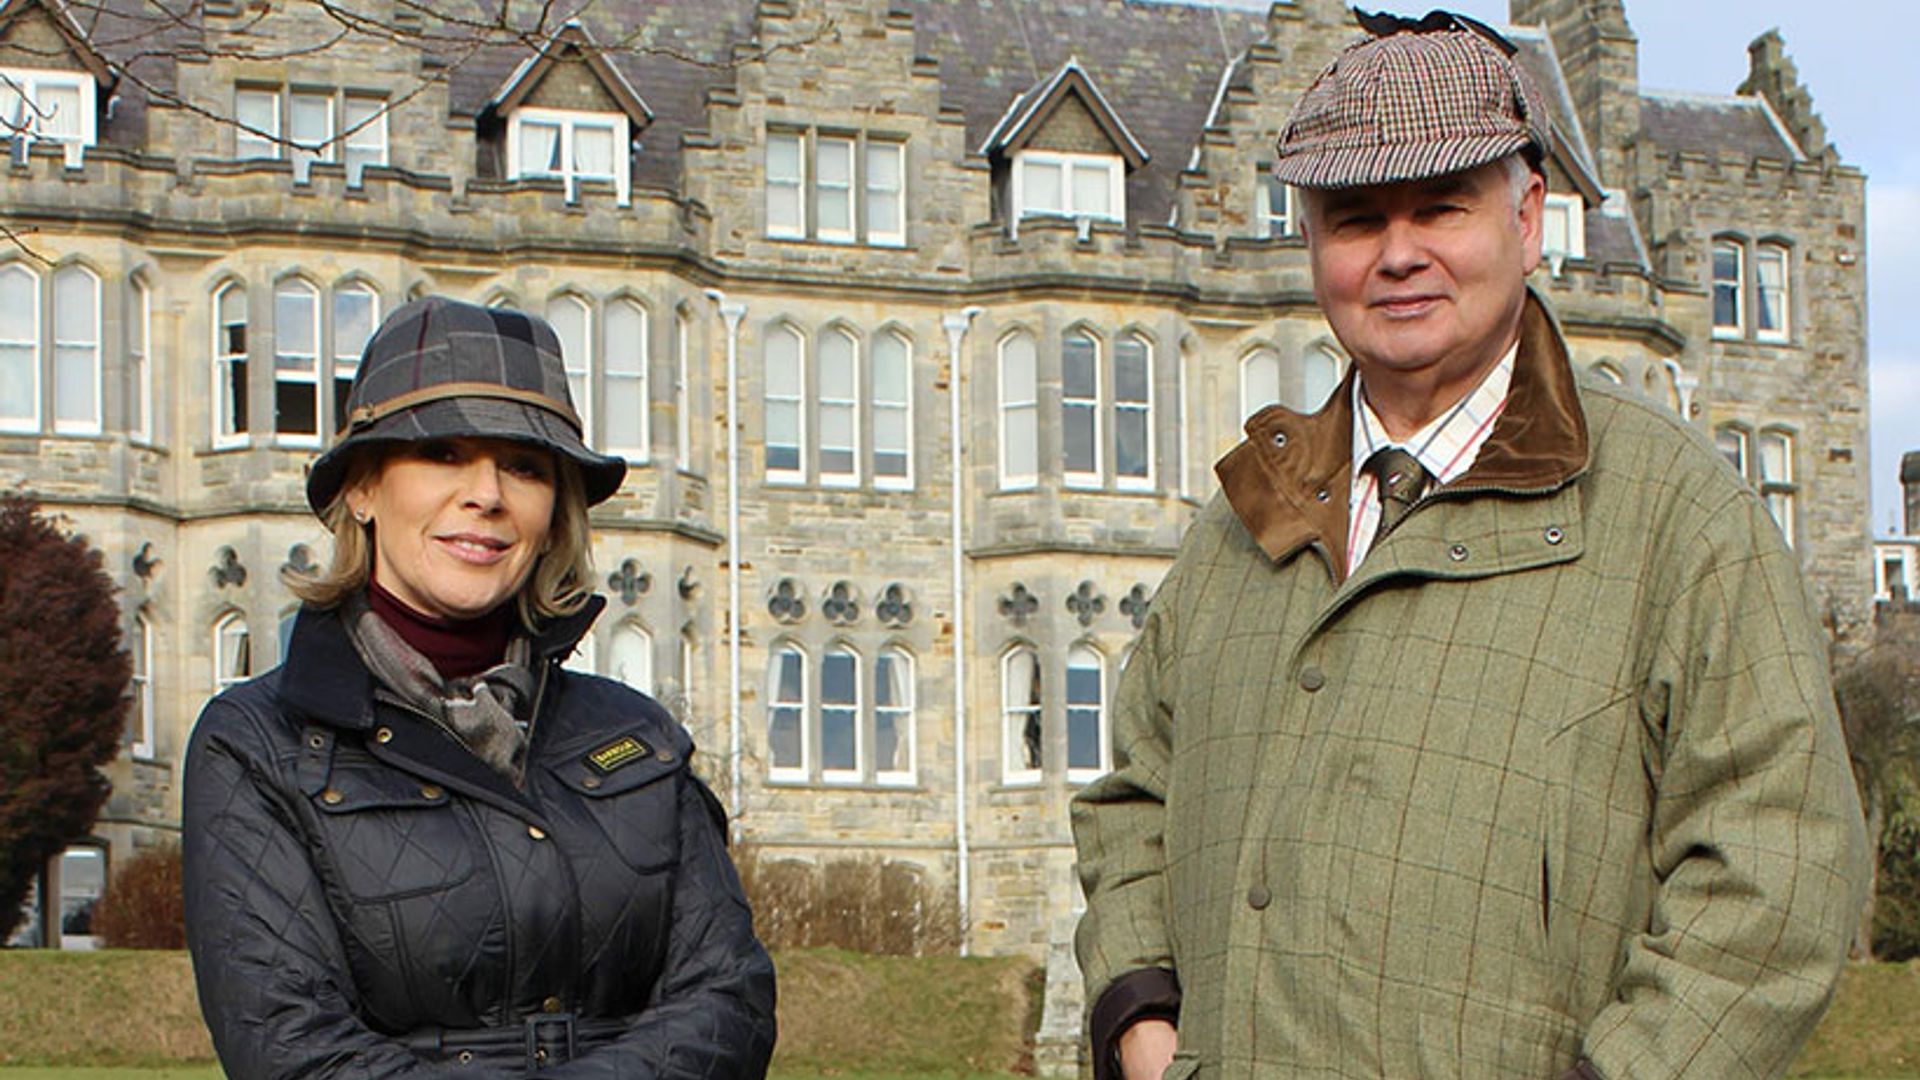 Eamonn Holmes and Ruth Langsford dress in matching tweed for TV show